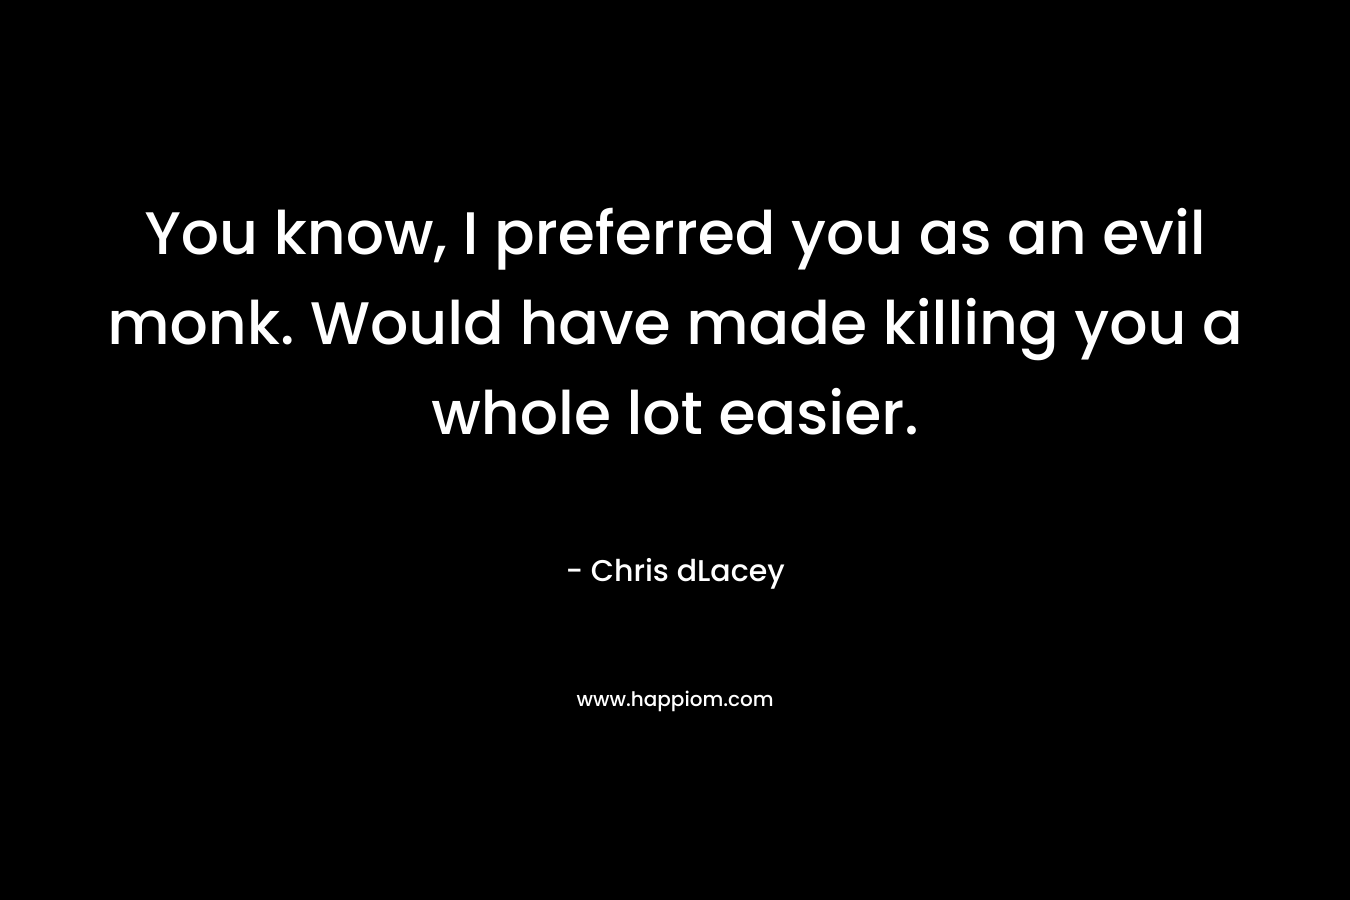 You know, I preferred you as an evil monk. Would have made killing you a whole lot easier. – Chris dLacey